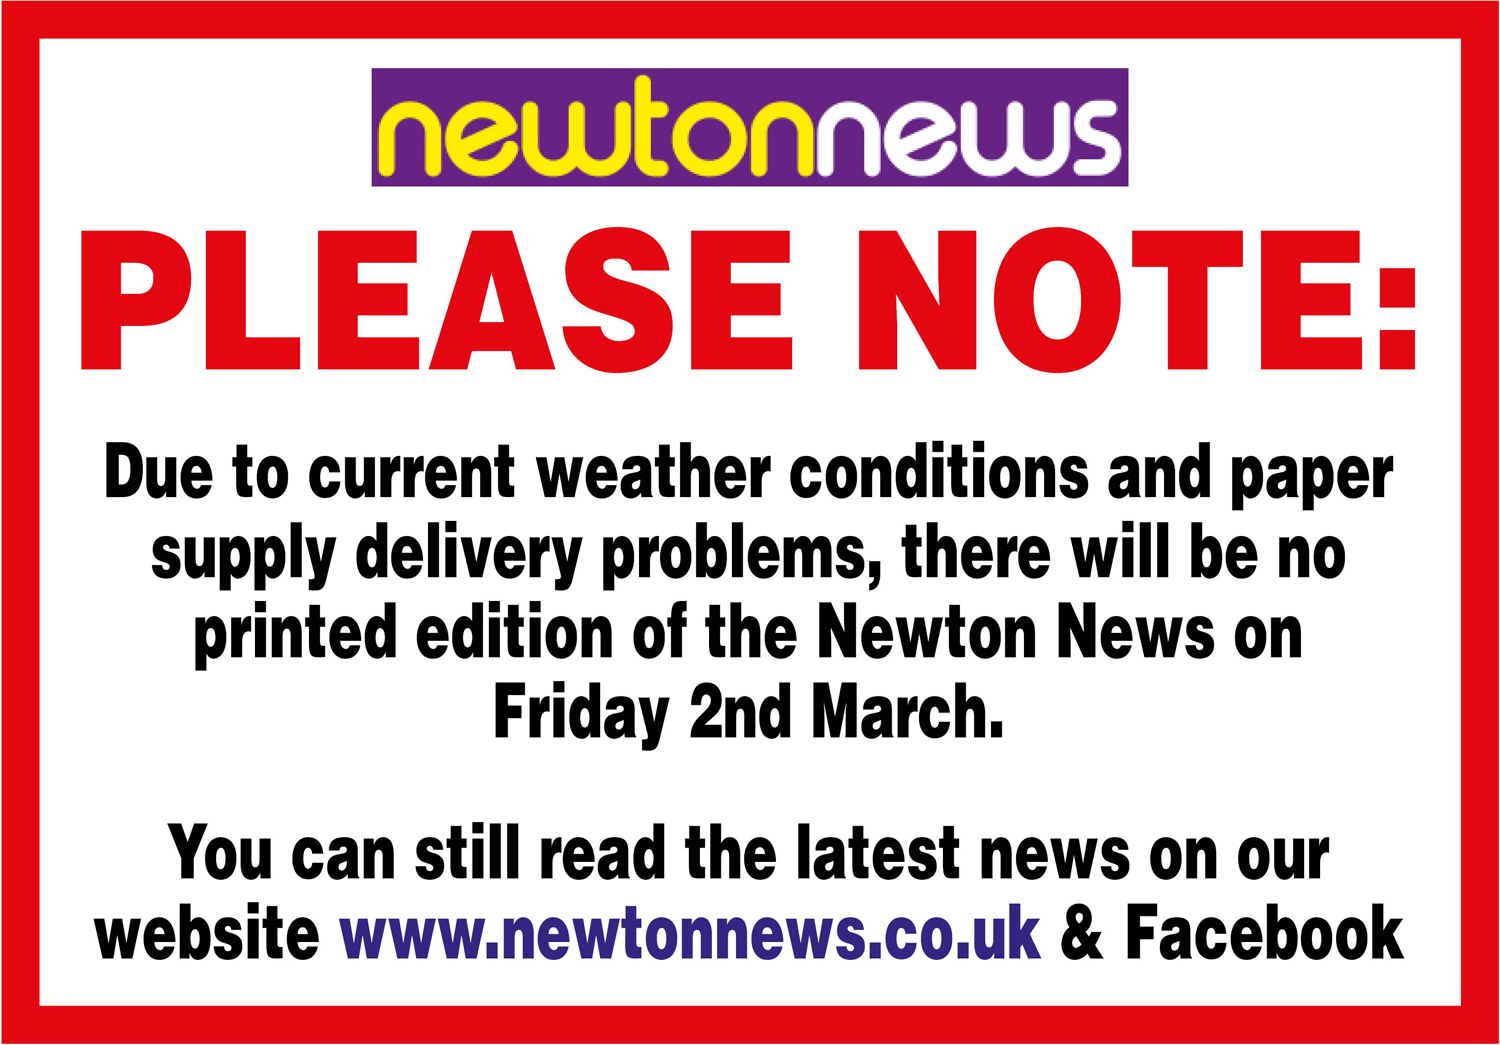 No Printed Newton News on 2nd March